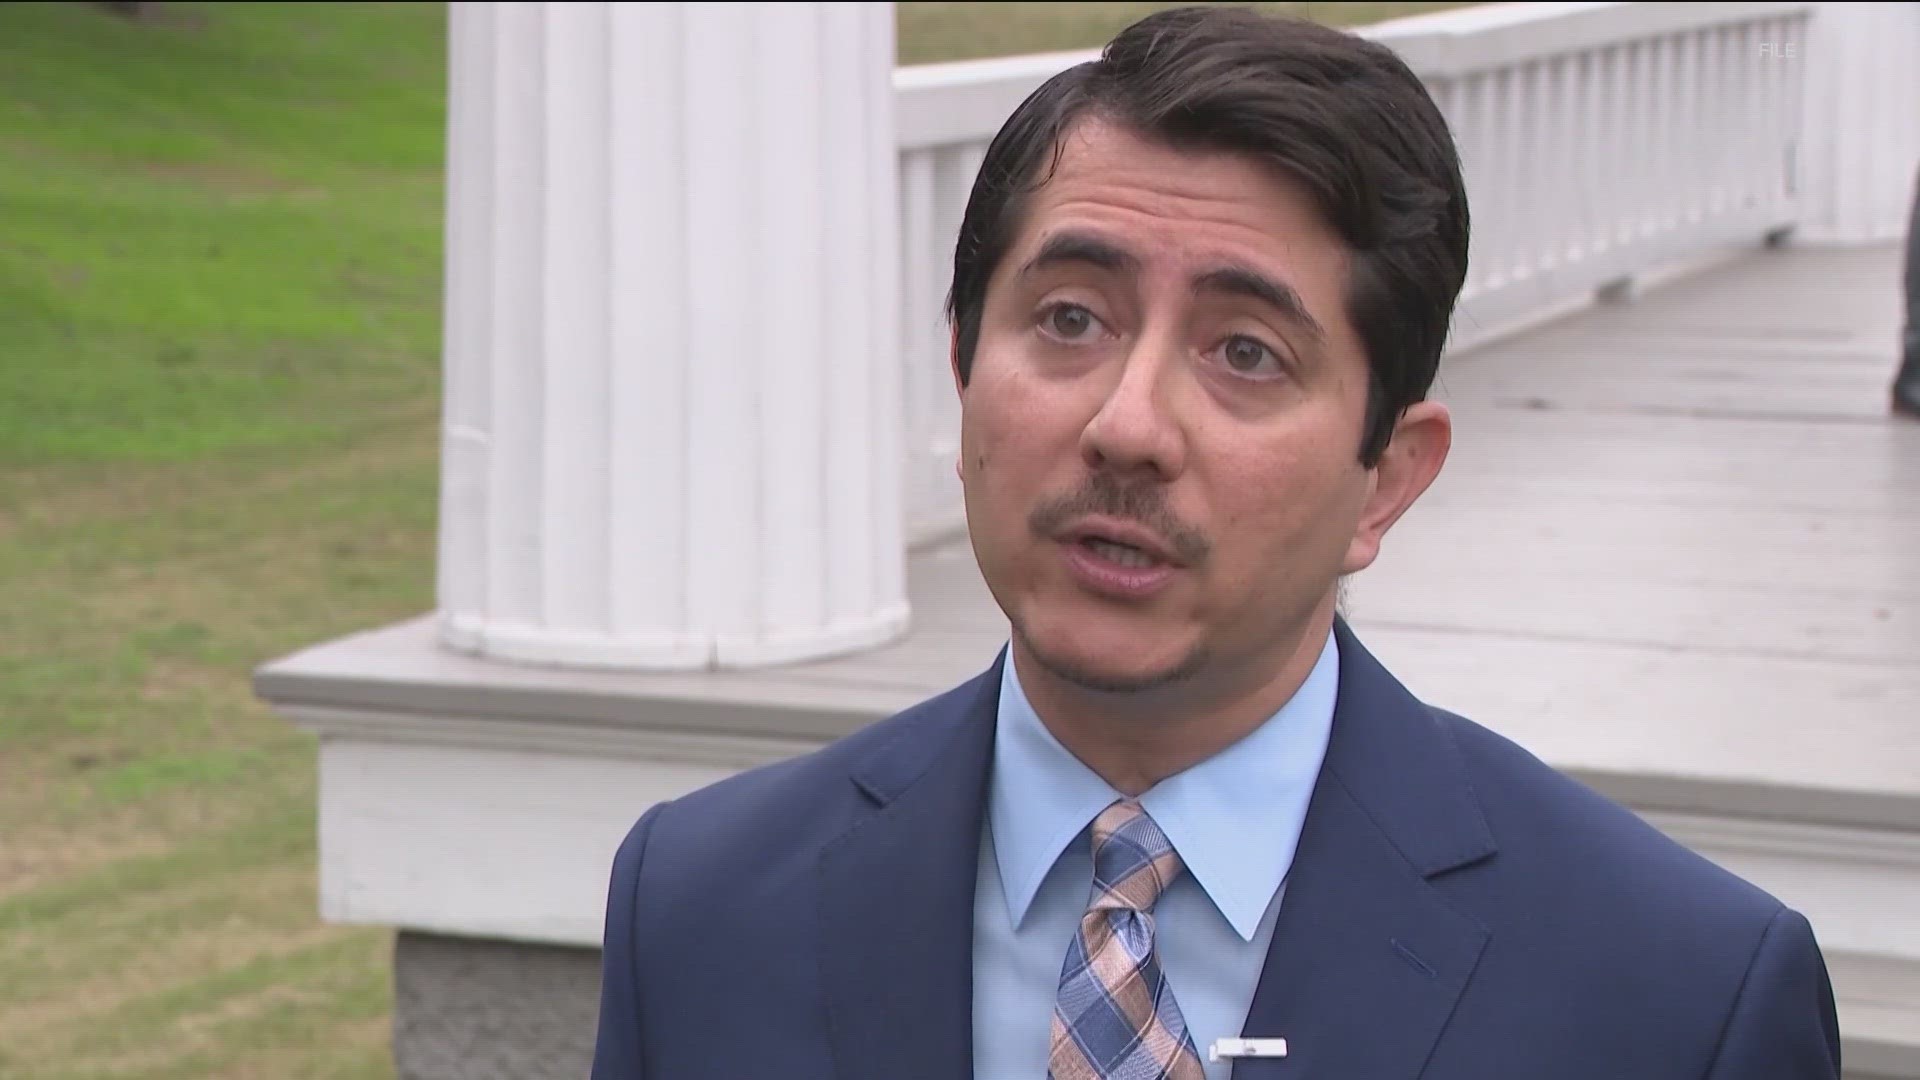 Travis County District Attorney Jose Garza has responded to a new complaint about him being a so-called "rogue DA."